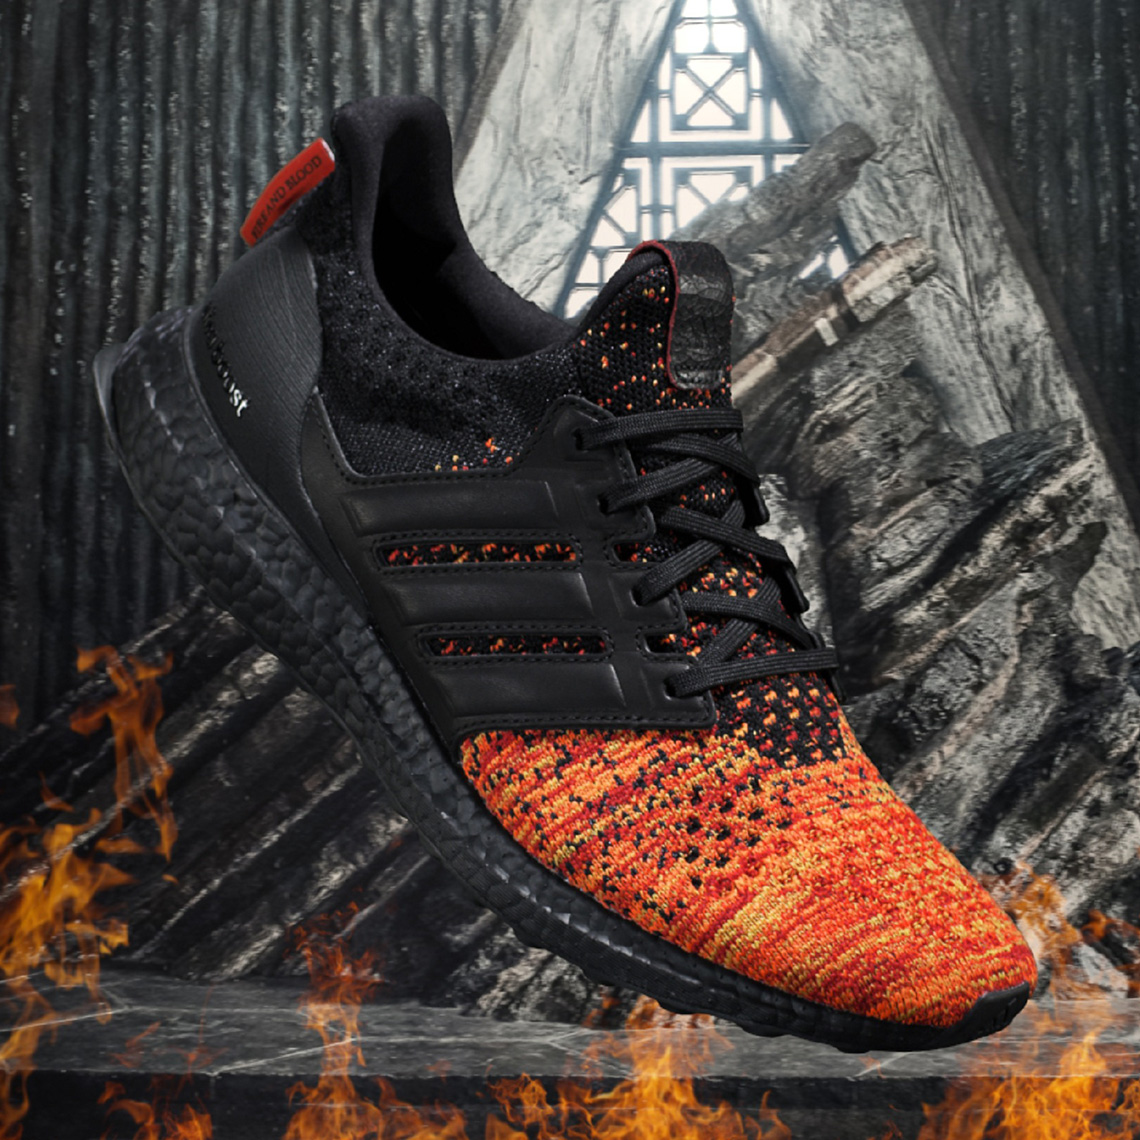 Game Of Thrones Adidas Shoes Release Date 4